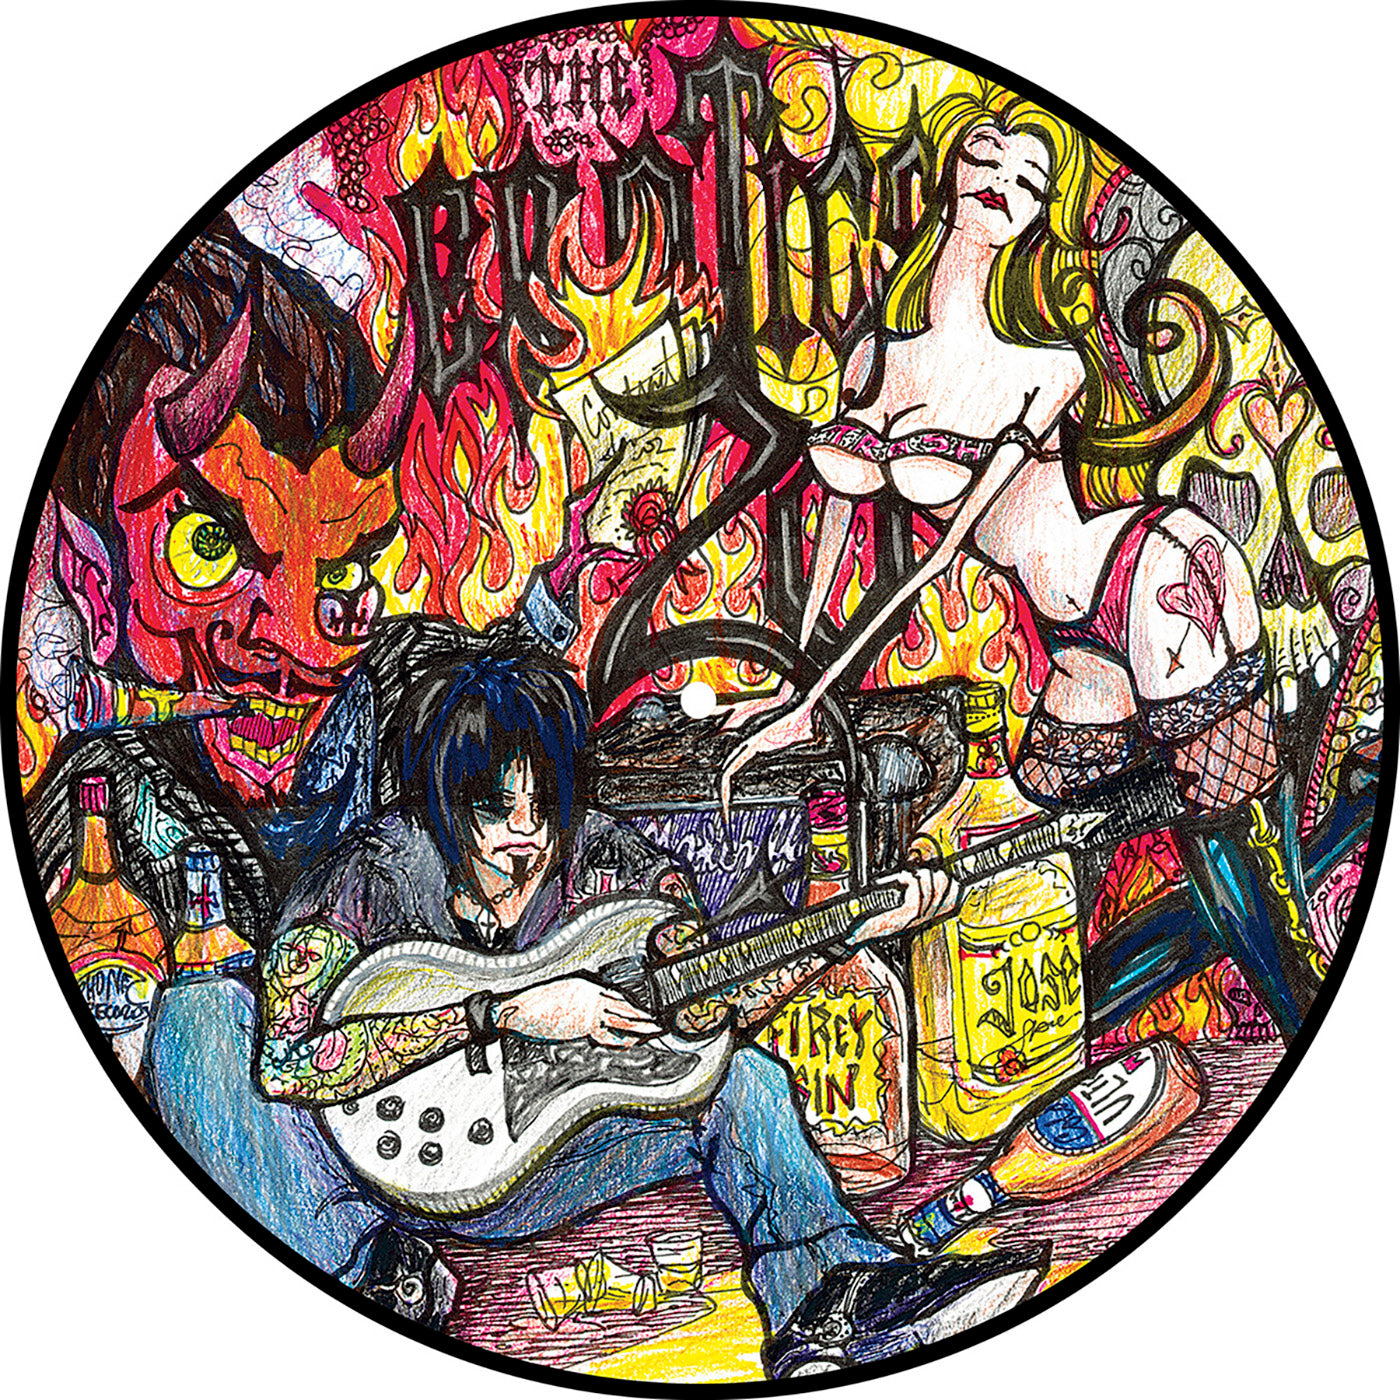 The Erotics - 20 Years of Nothing to Show for It [Best of the Erotics] - Vinyl LP Picture Disc